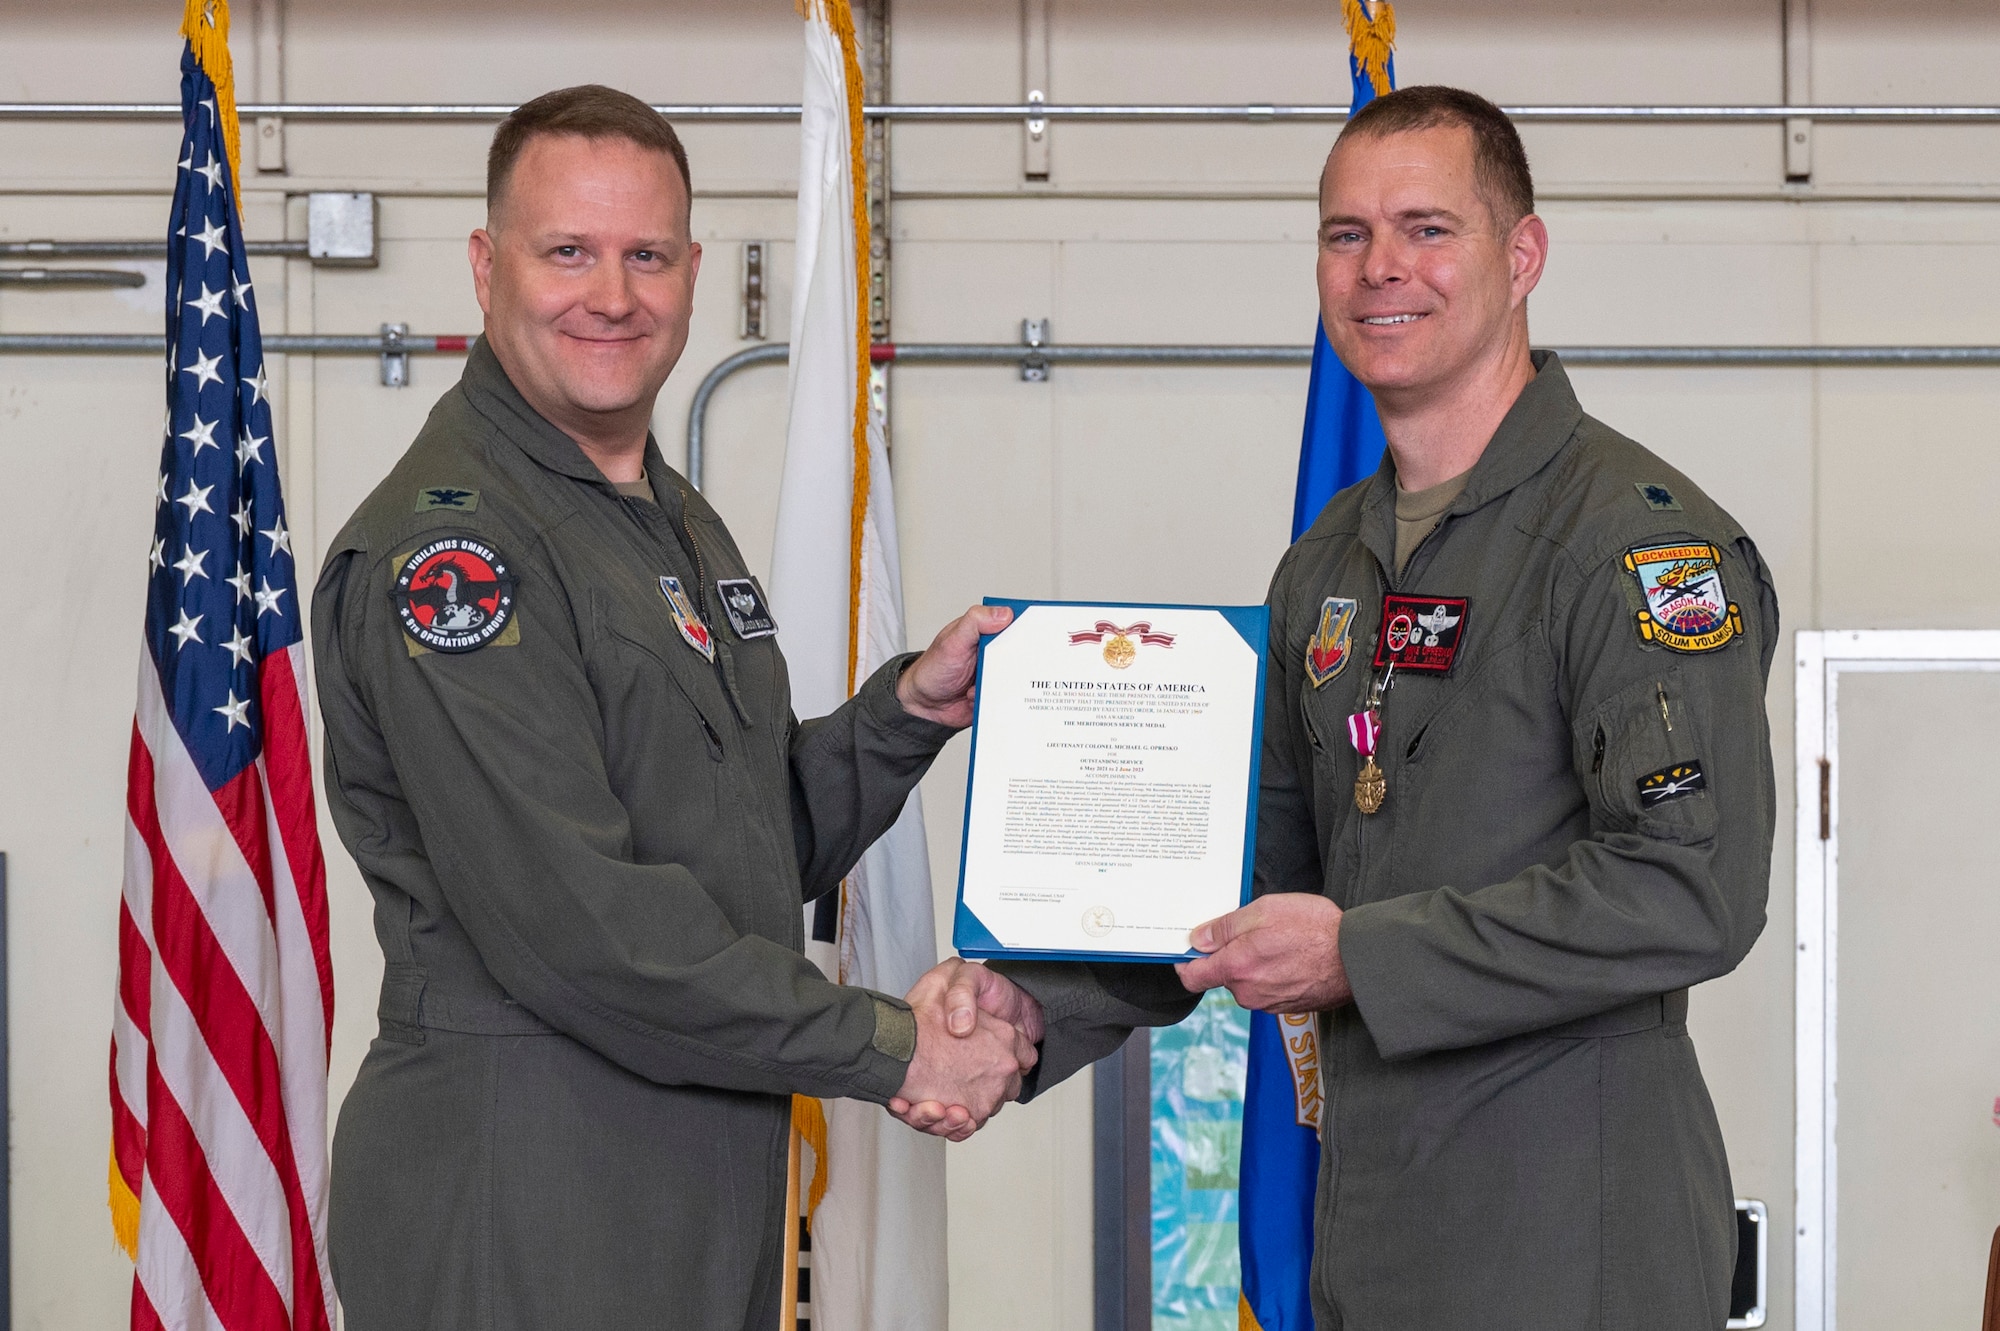 U.S. Air Force Col. Jason Bialon, left, 9th Operations Group commander, presents a Meritorious Service Medal to Lt. Col. Michael Opresko, 5th Reconnaissance Squadron commander, at Osan Air Base, Republic of Korea, June 2, 2023. The MSM is a military decoration awarded by various branches of the Armed Forces to recognize distinguished or outstanding meritorious service.  (U.S. Air Force photo by Airman 1st Class Aaron Edwards)